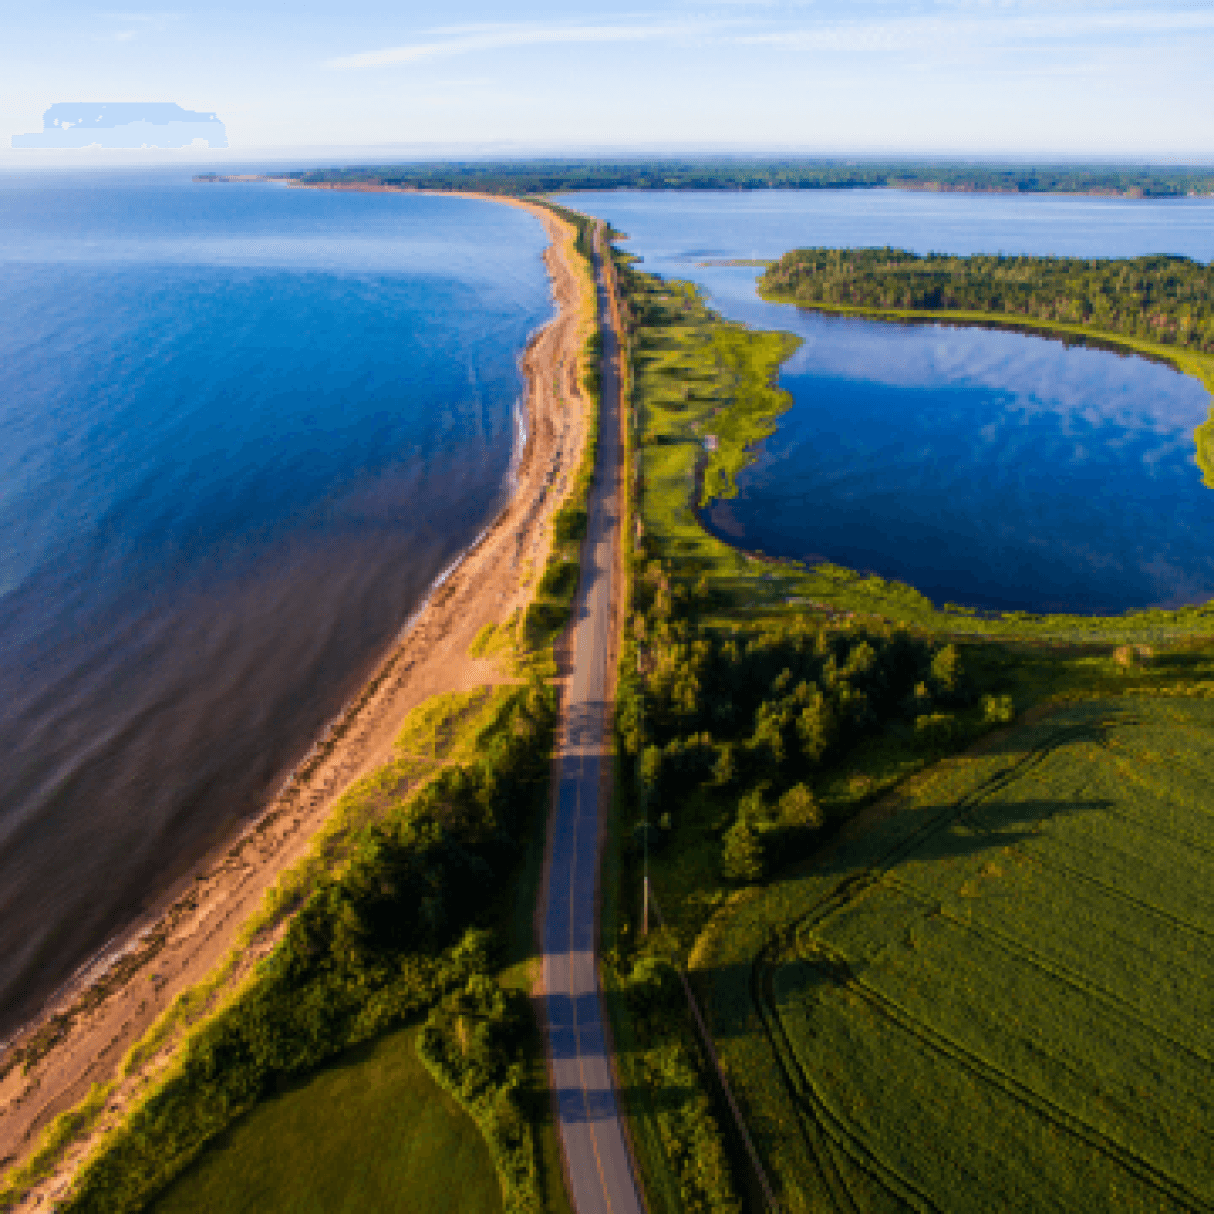 The road toward the Panmure island lighthouse in Prince Edward Island